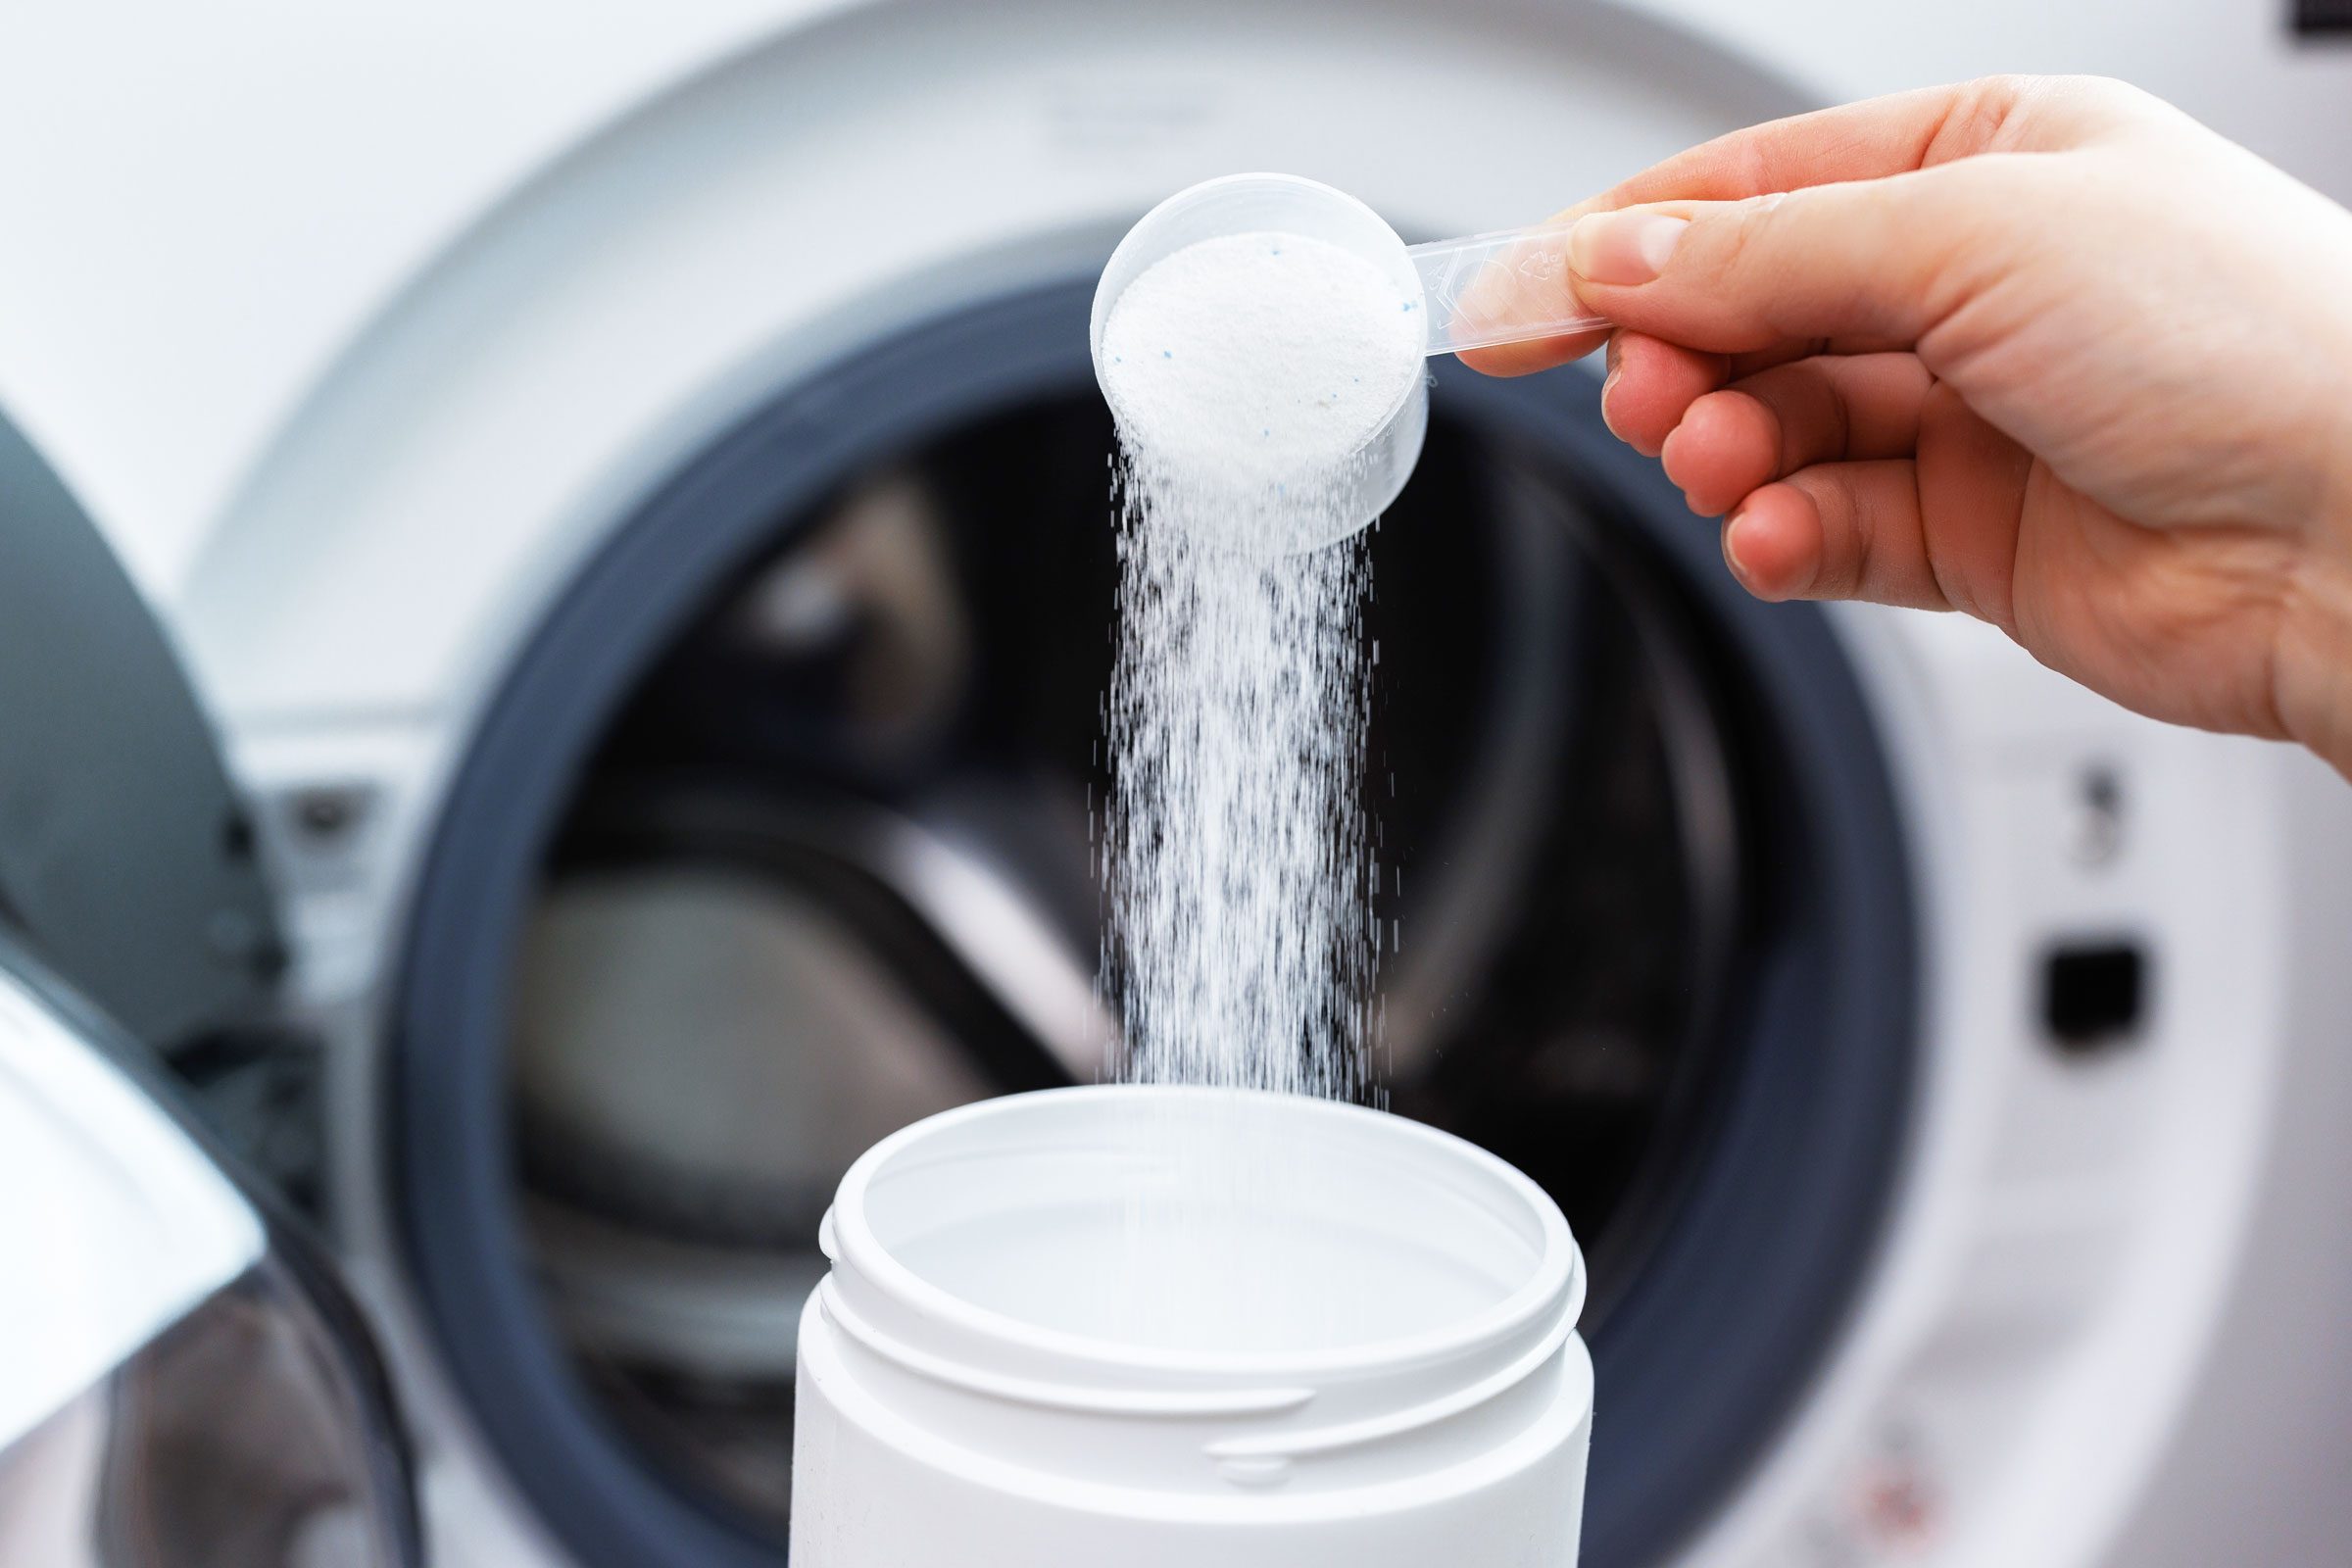 How To Clean A Front Load Washer With Bleach